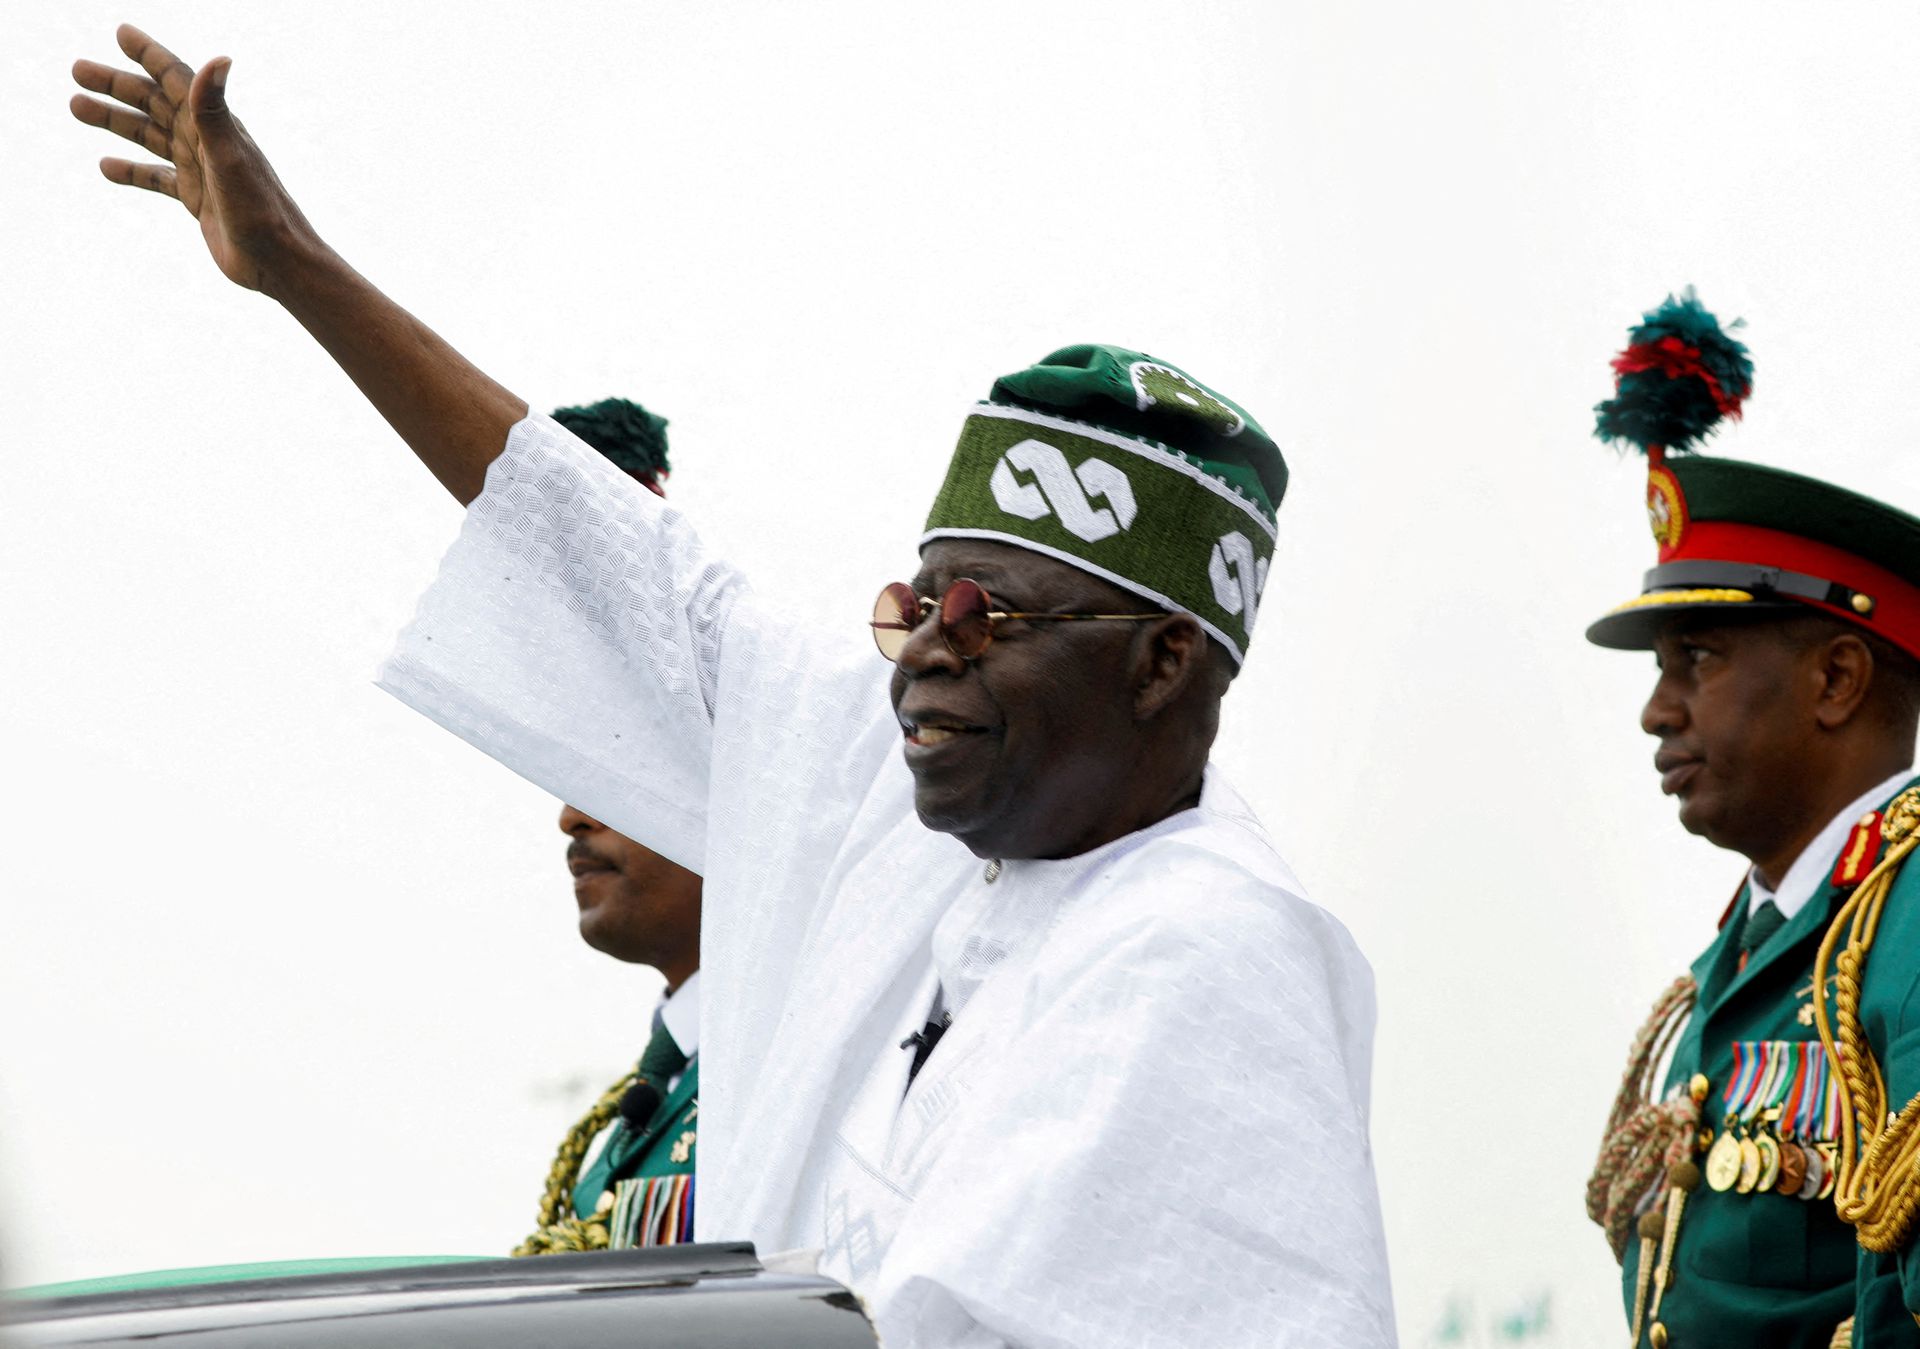 Nigeria's President Bola Tinubu waves to a crowd as he takes the traditional ride on top of a ceremonial vehicle, after his swearing-in ceremony in Abuja, Nigeria May 29, 2023. REUTERS/Temilade Adelaja/File Photo